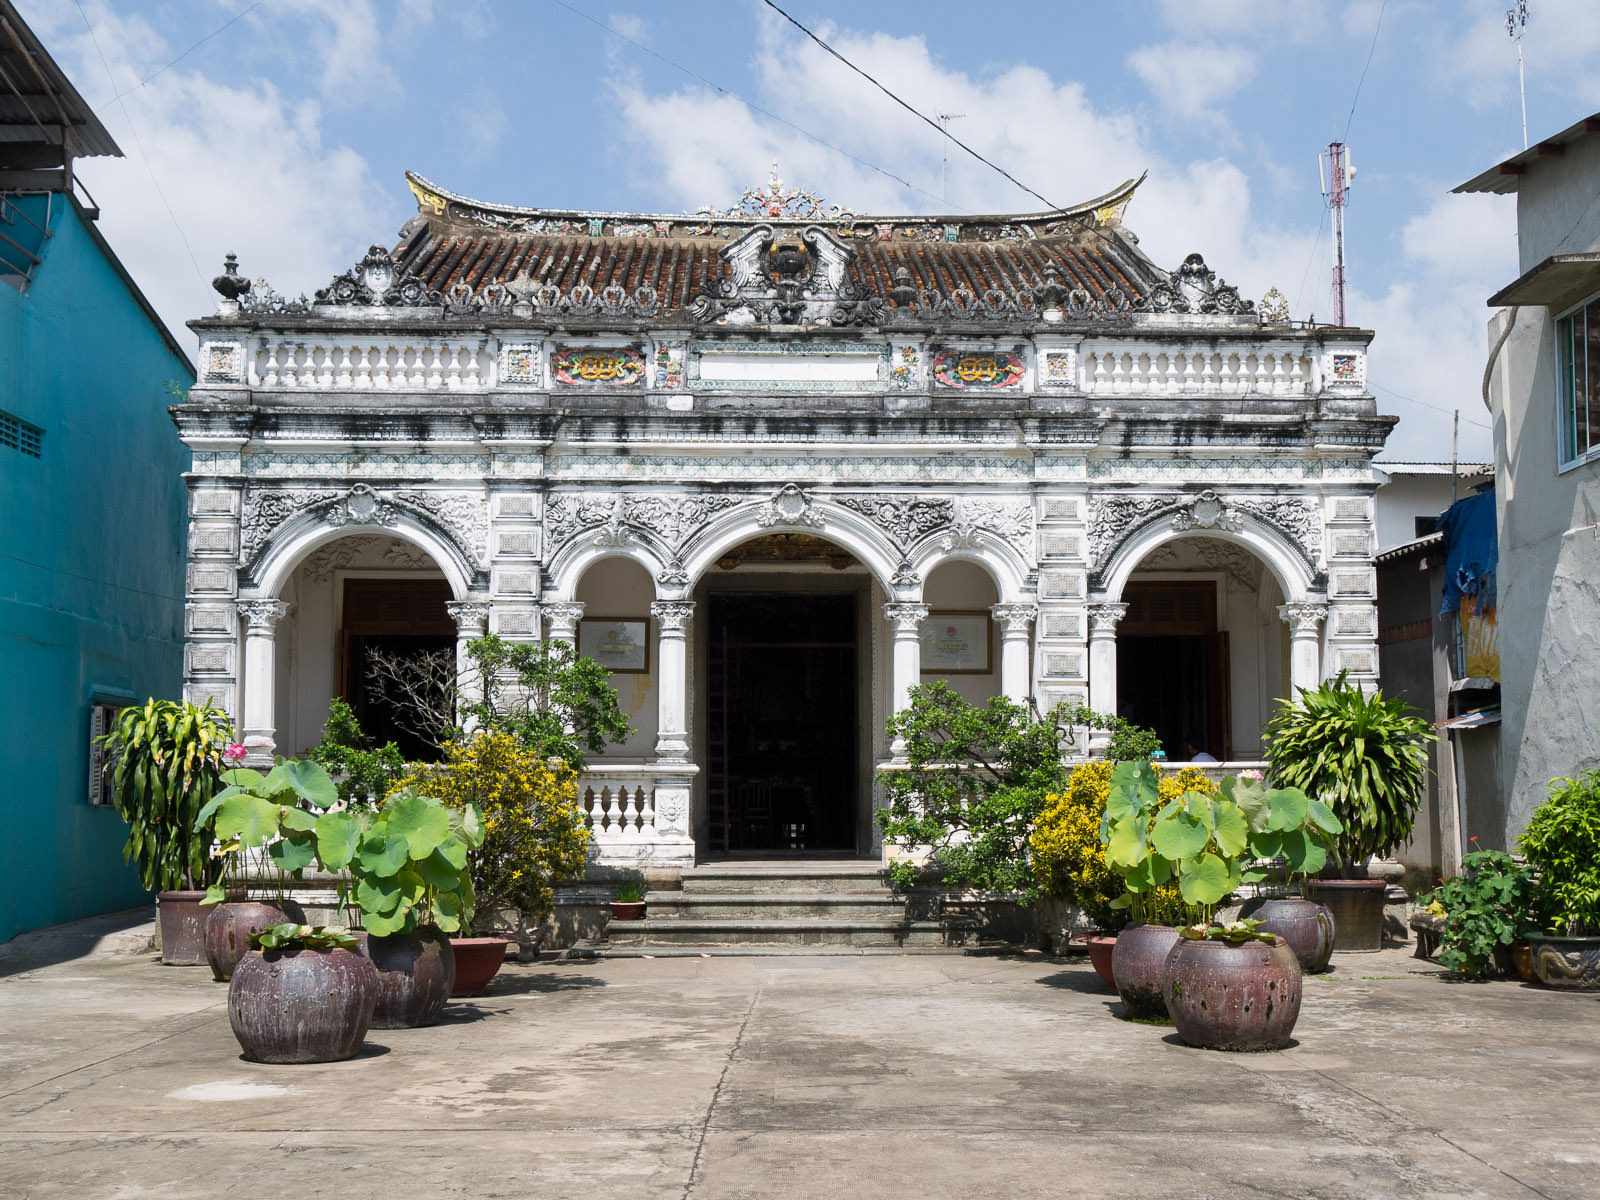 The house of Huynh Thuy Le